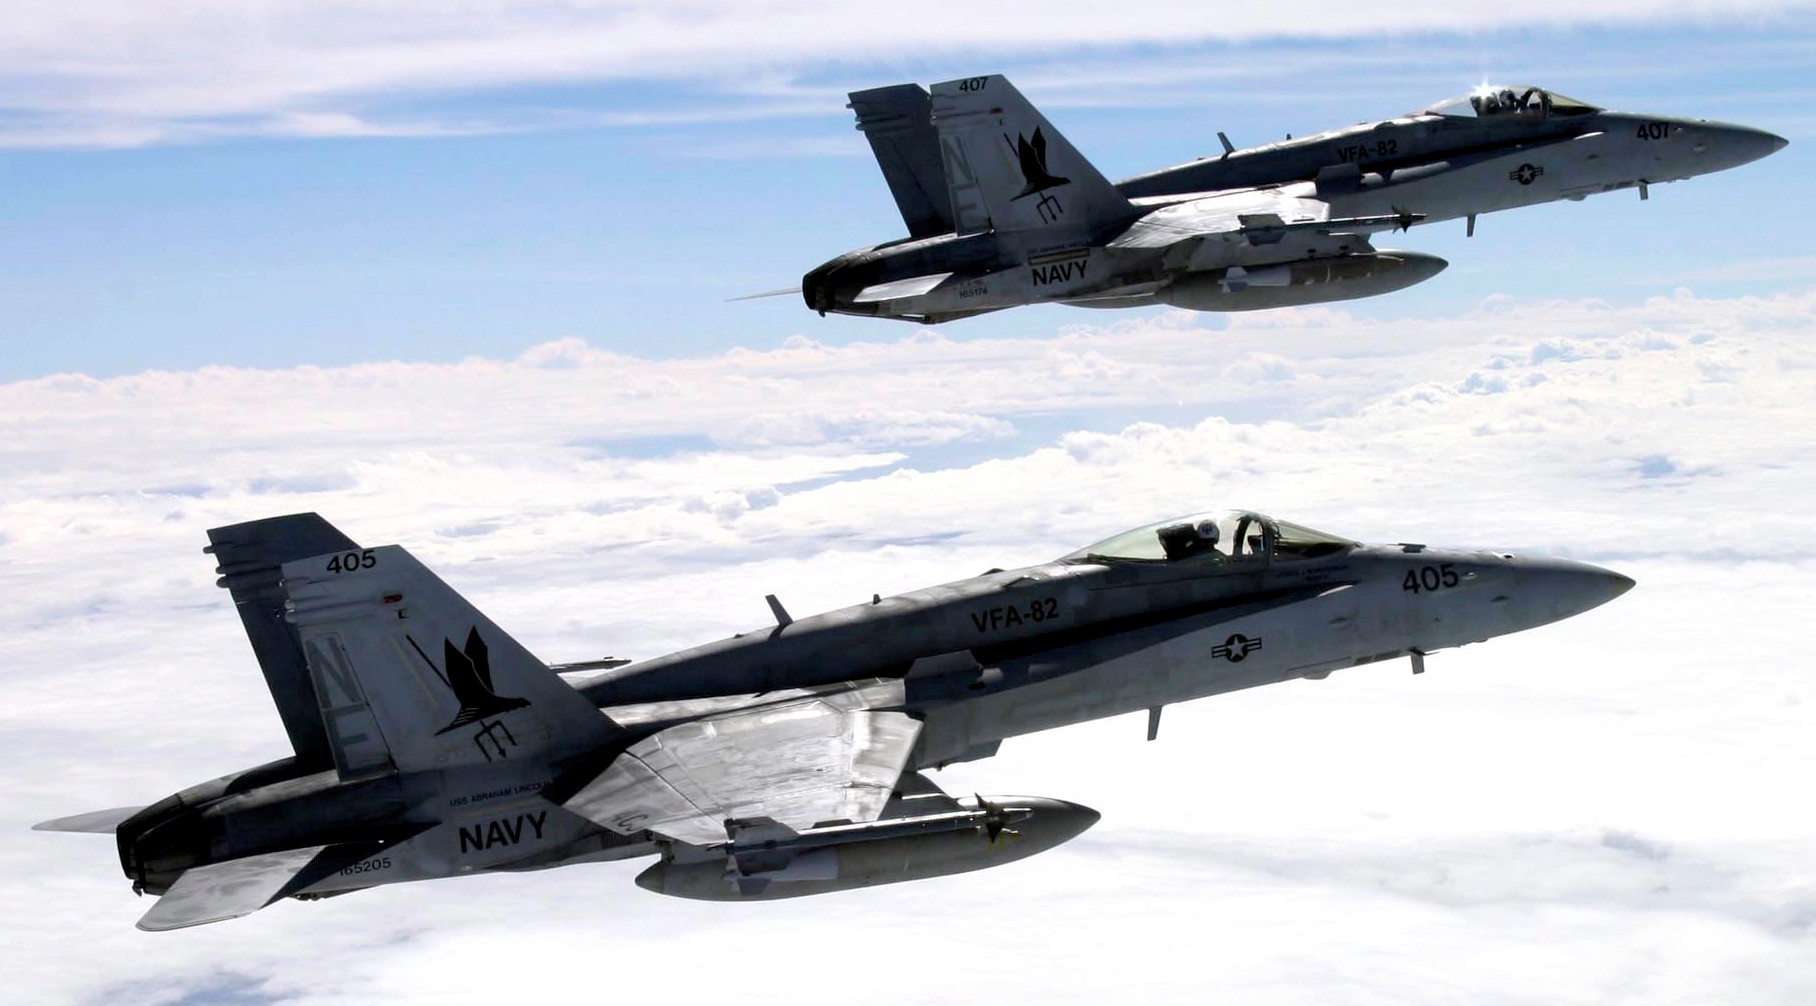 vfa-82 marauders strike fighter squadron f/a-18c hornet us navy pacific missile range facility 37